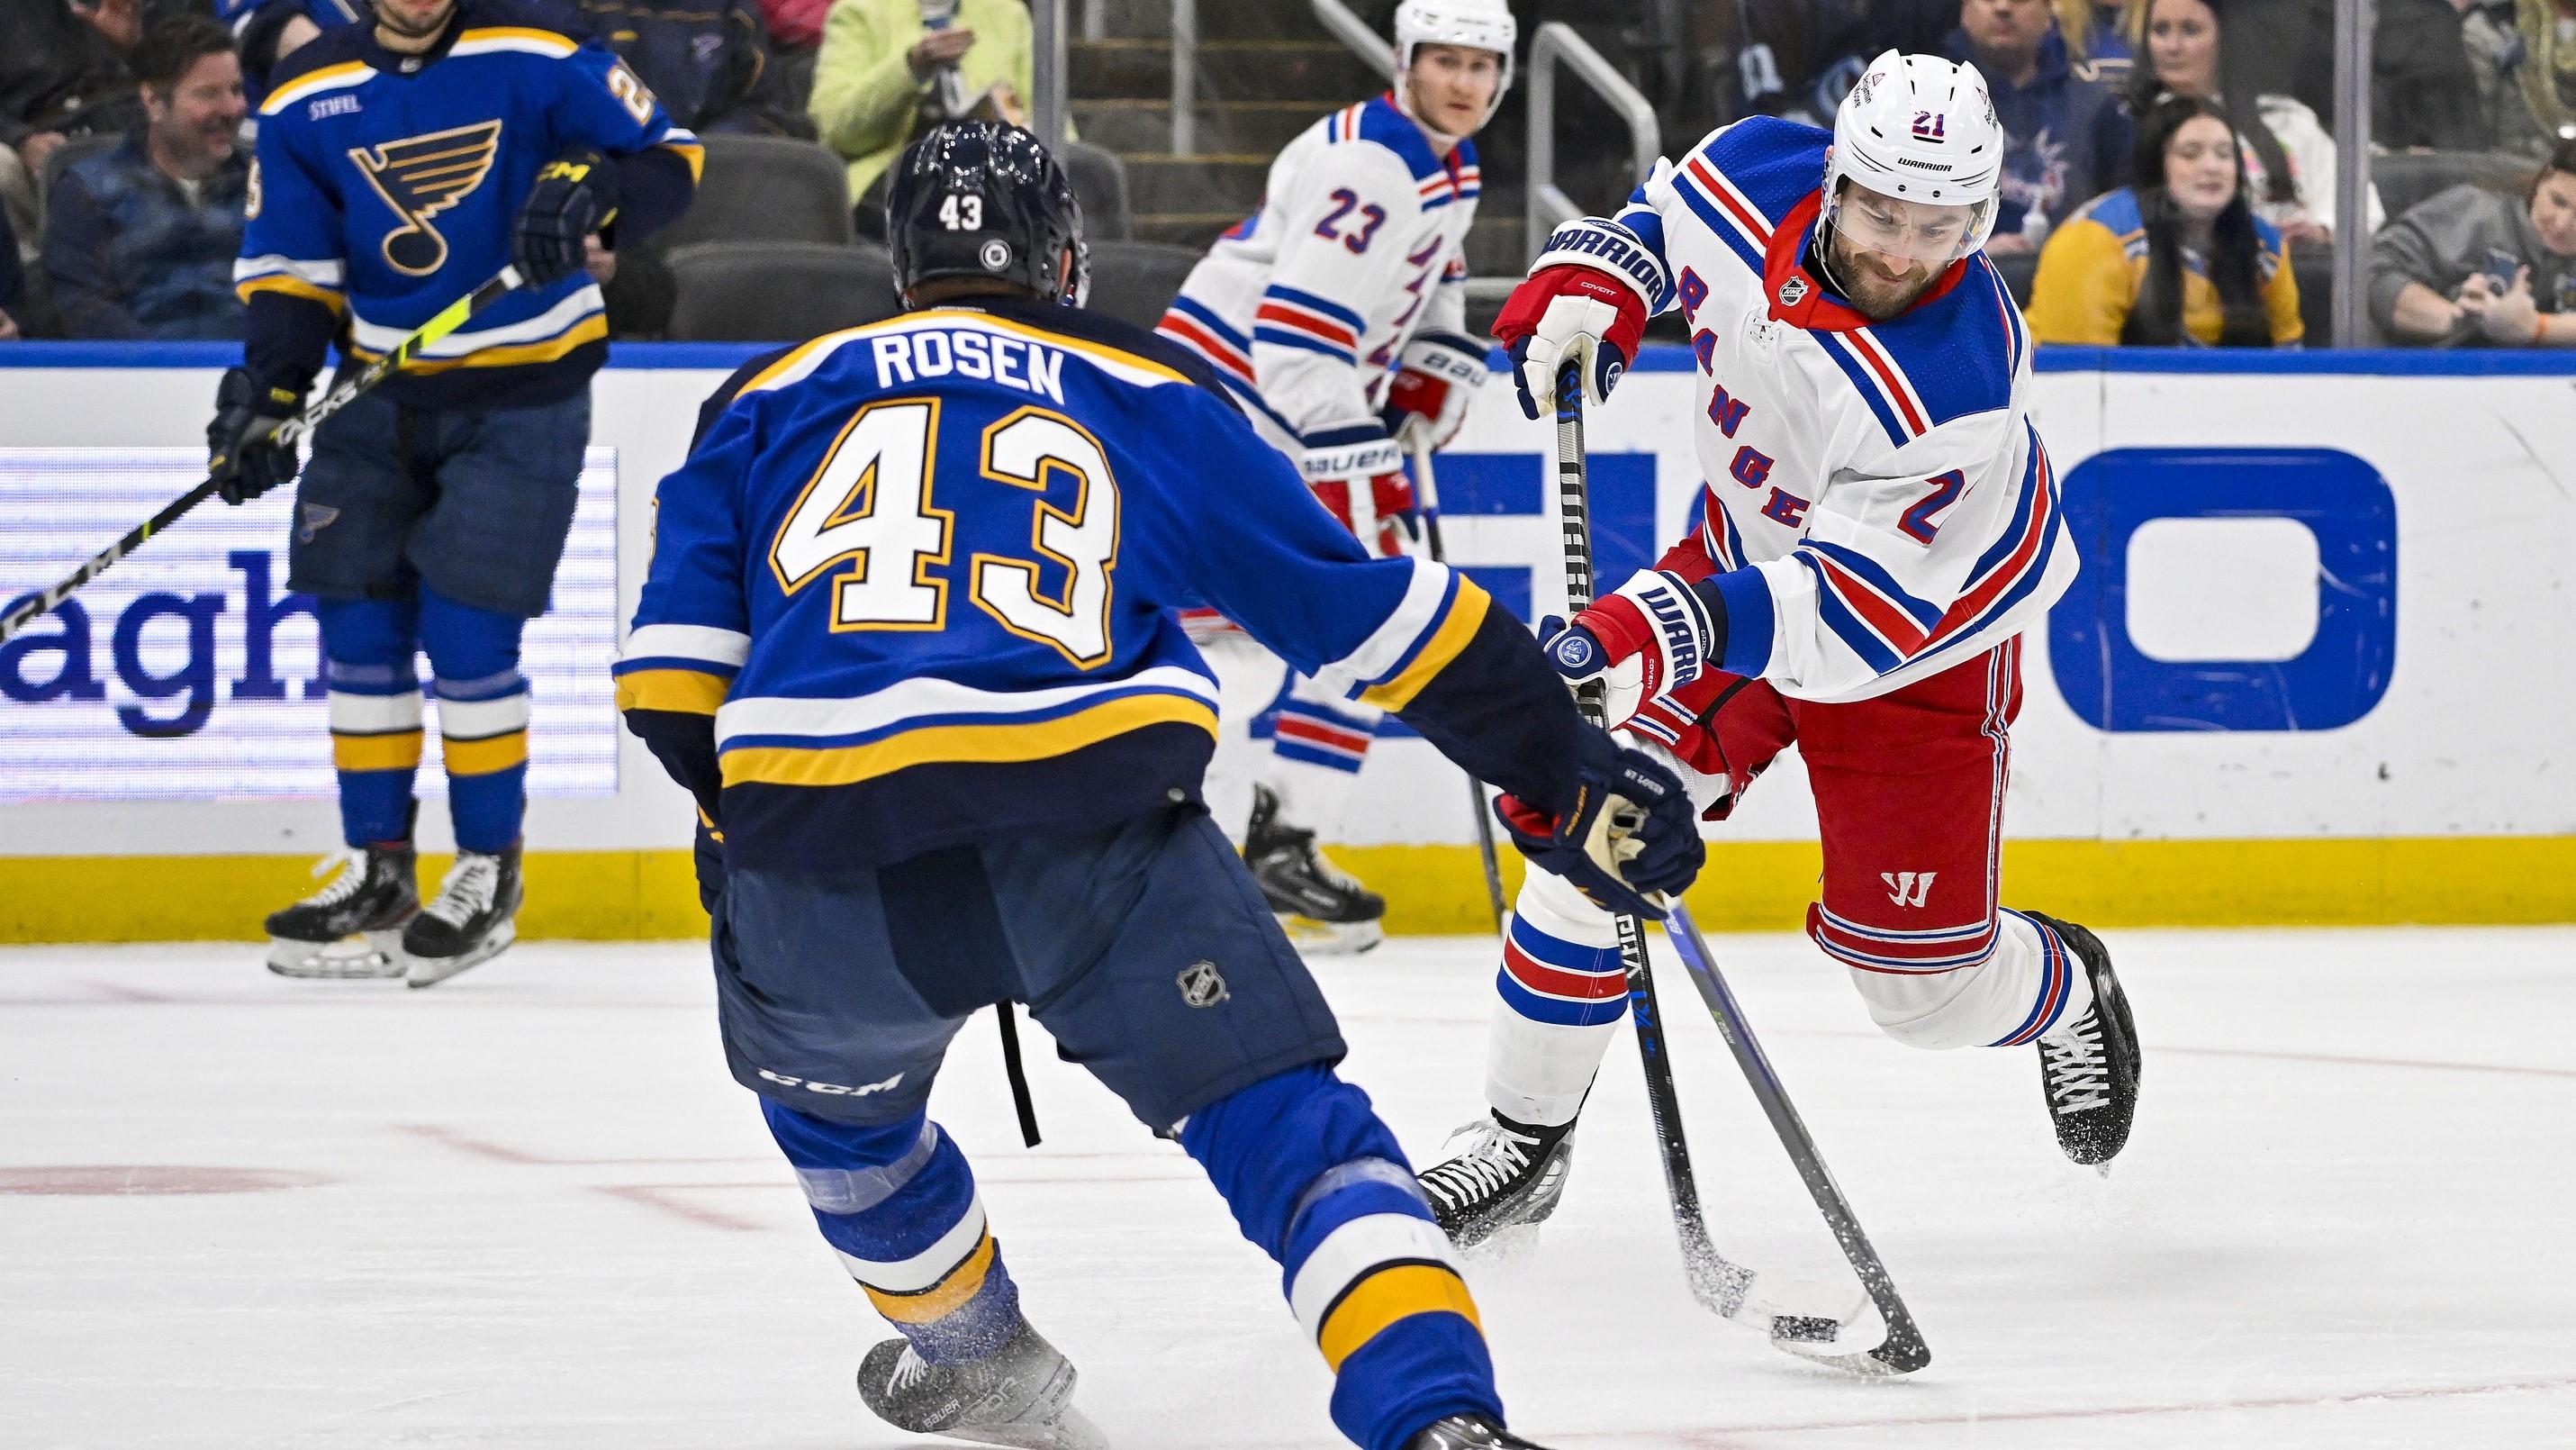 Apr 6, 2023; St. Louis, Missouri, USA; New York Rangers center Barclay Goodrow (21) shoots as St. Louis Blues defenseman Calle Rosen (43) defends during the first period at Enterprise Center. / Jeff Curry-USA TODAY Sports